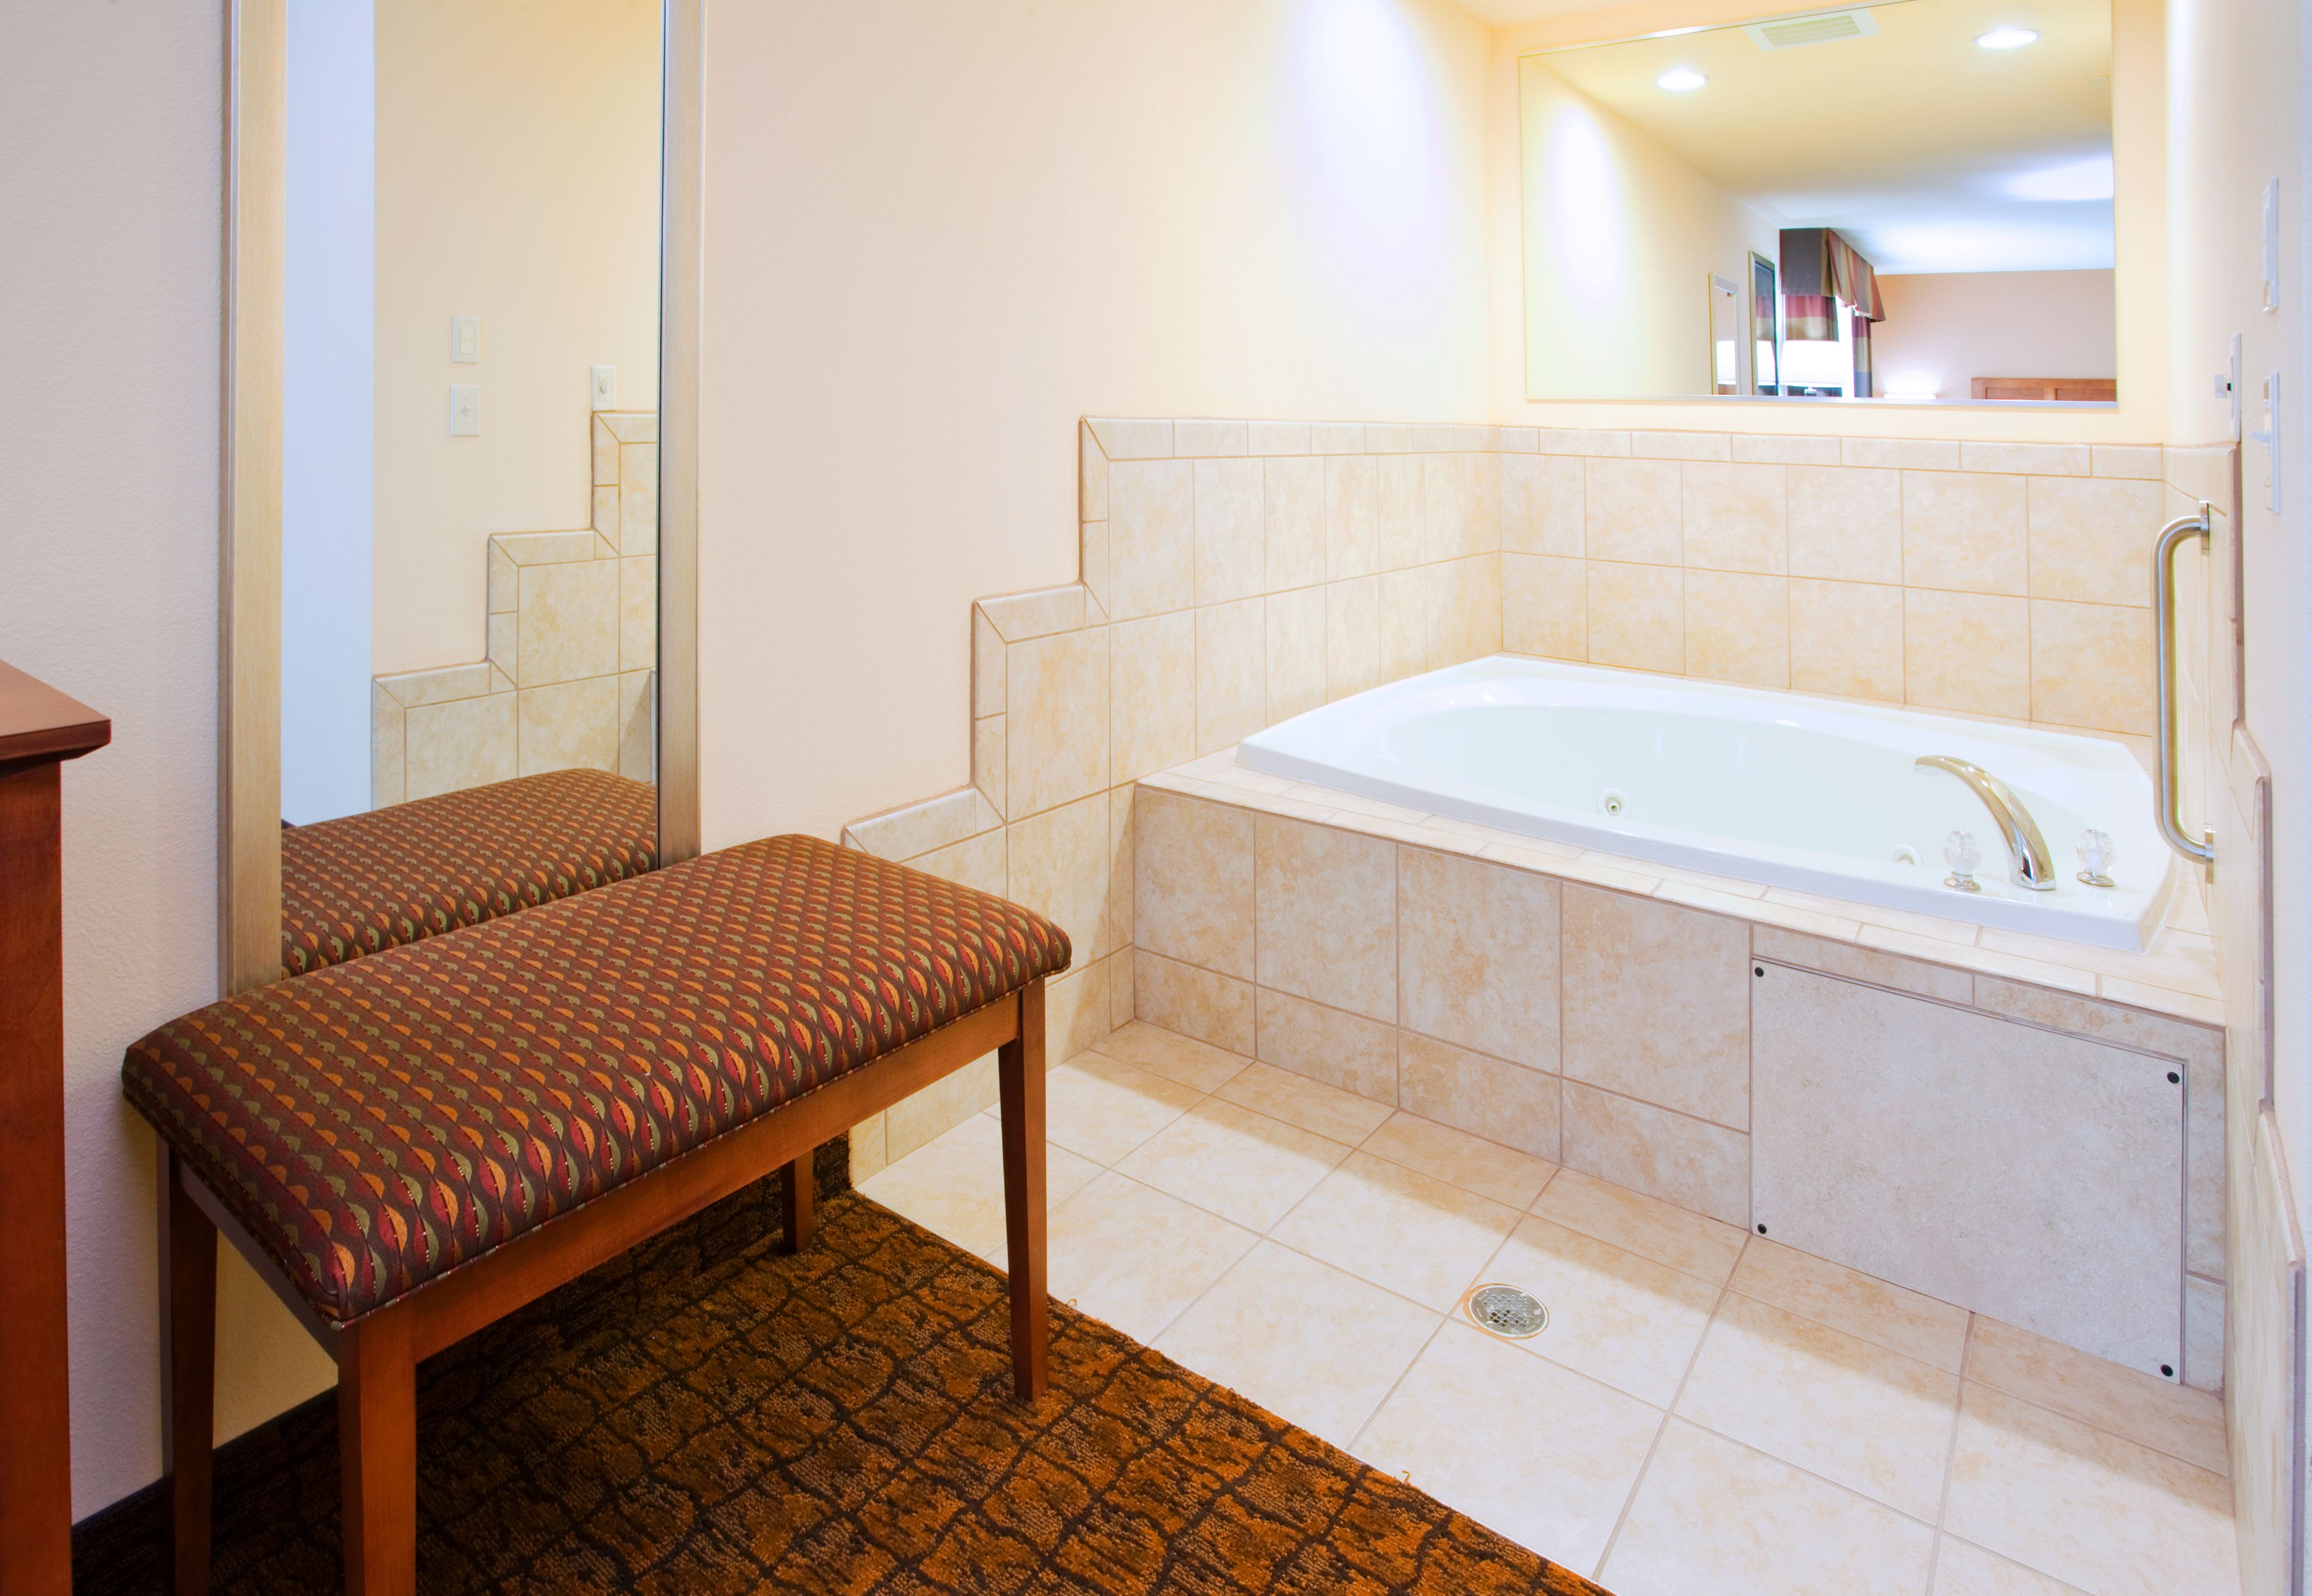 holiday-inn-express-and-suites-mount-airy-2533185433-original.jpg